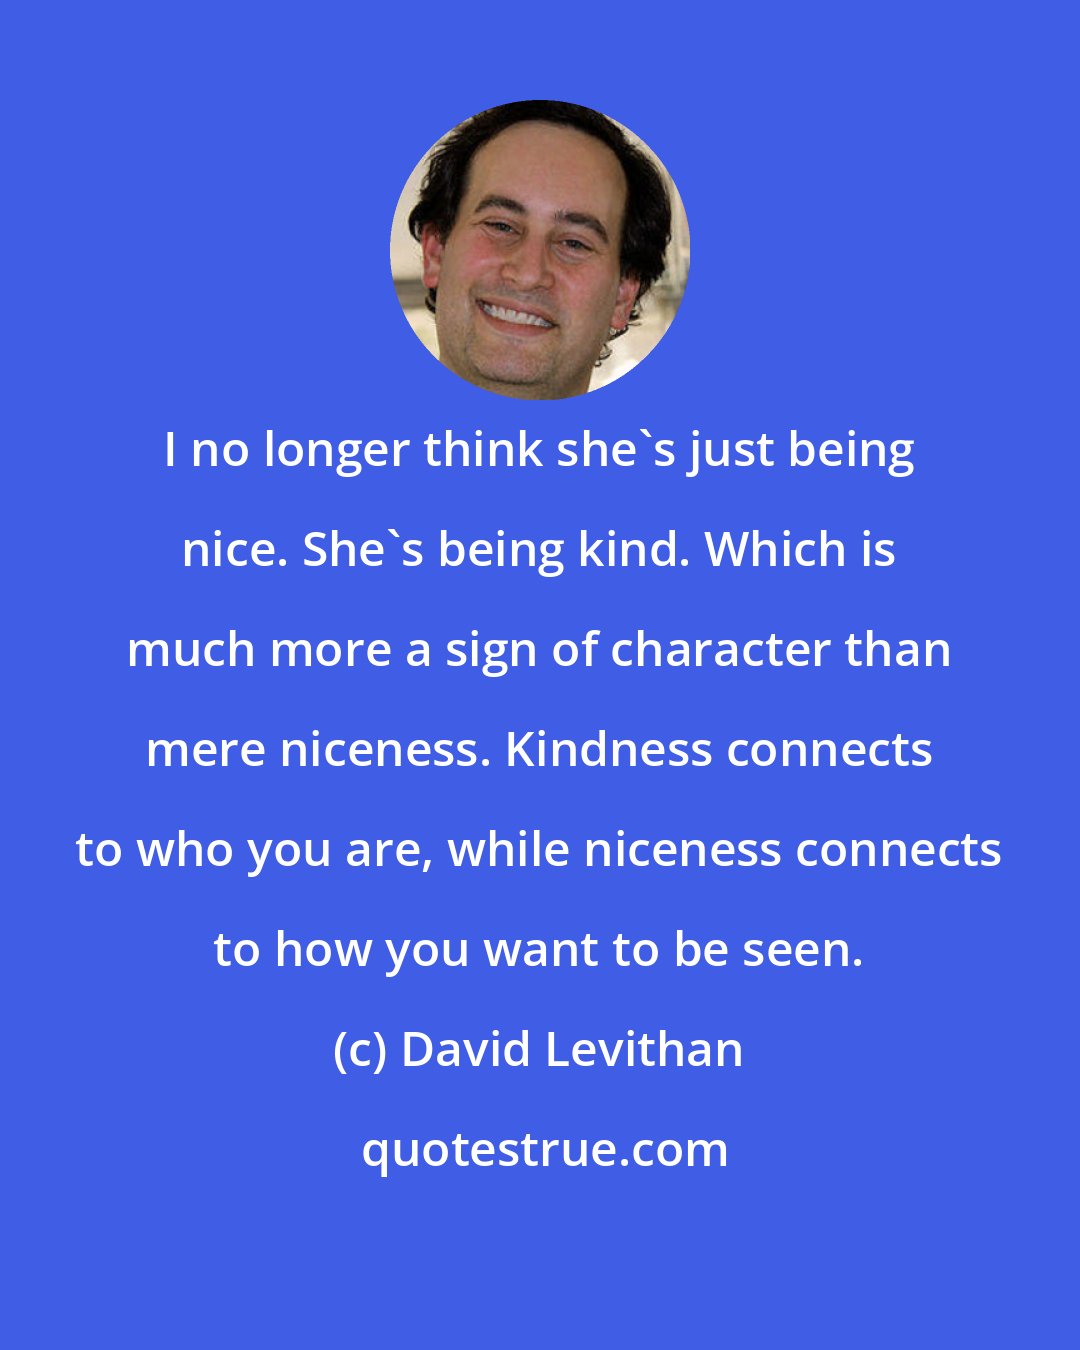 David Levithan: I no longer think she's just being nice. She's being kind. Which is much more a sign of character than mere niceness. Kindness connects to who you are, while niceness connects to how you want to be seen.